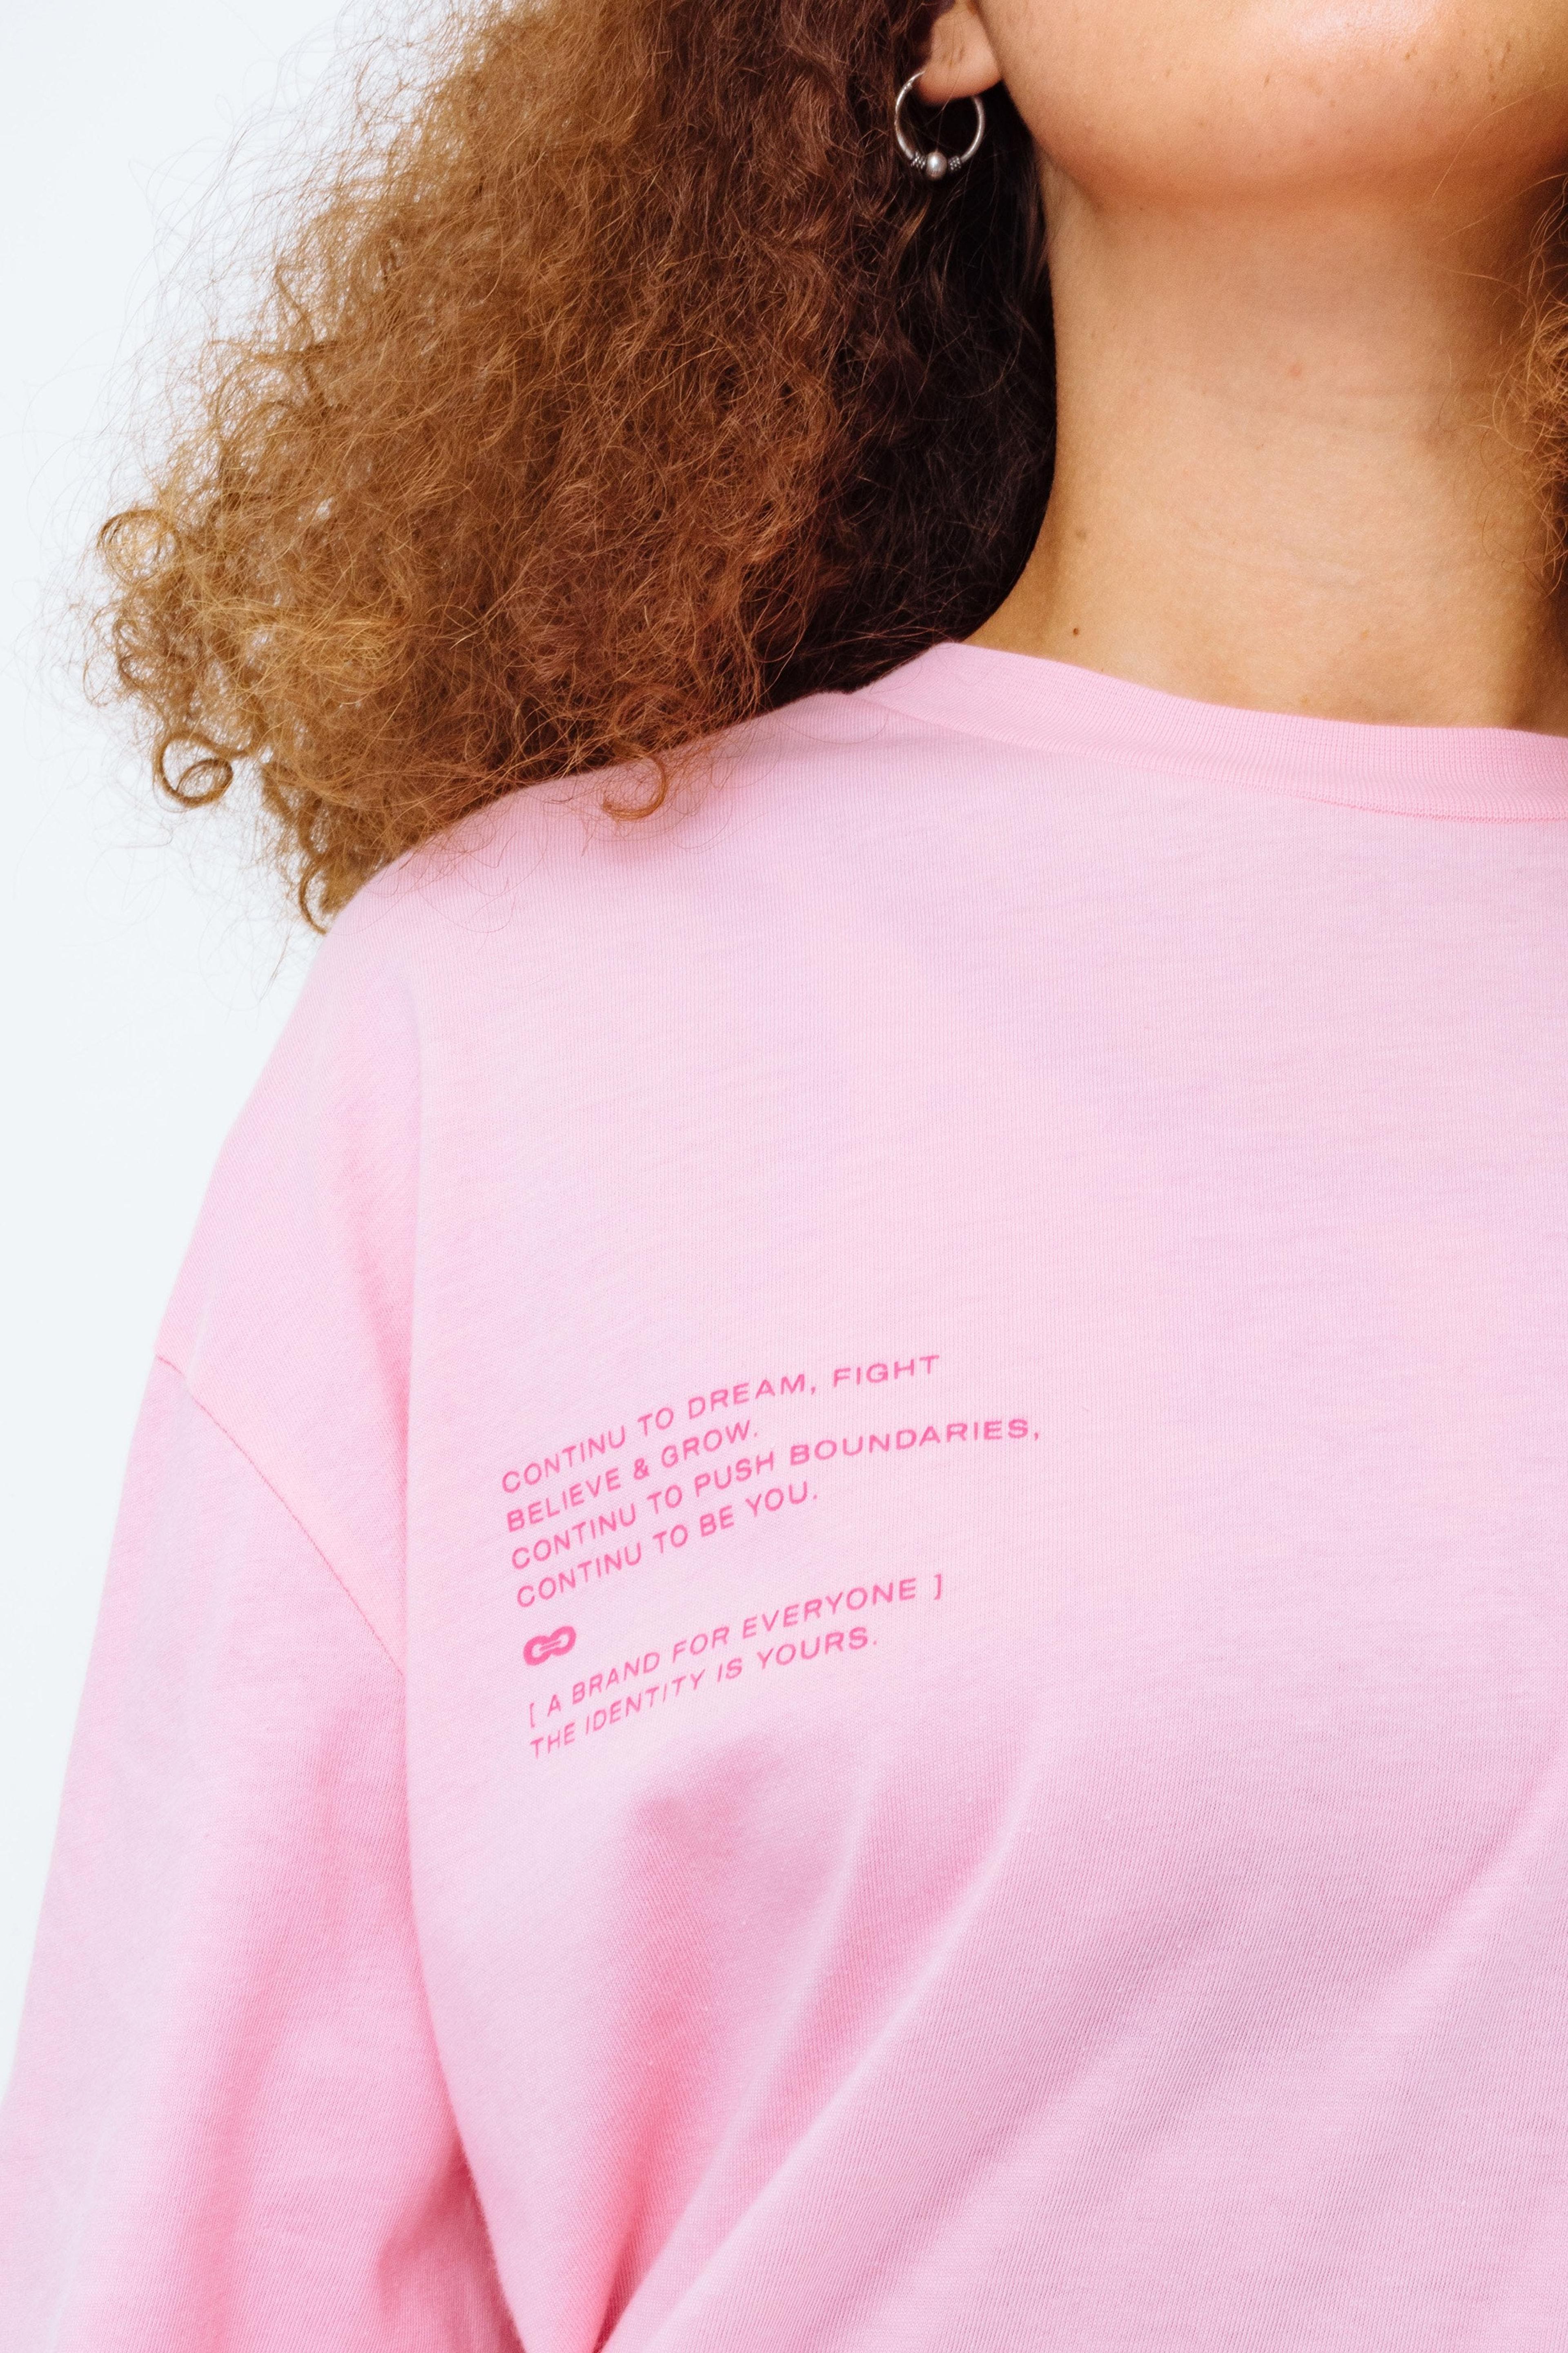 Alternate View 4 of CONTINU8 PINK OVERSIZED PRINT T-SHIRT